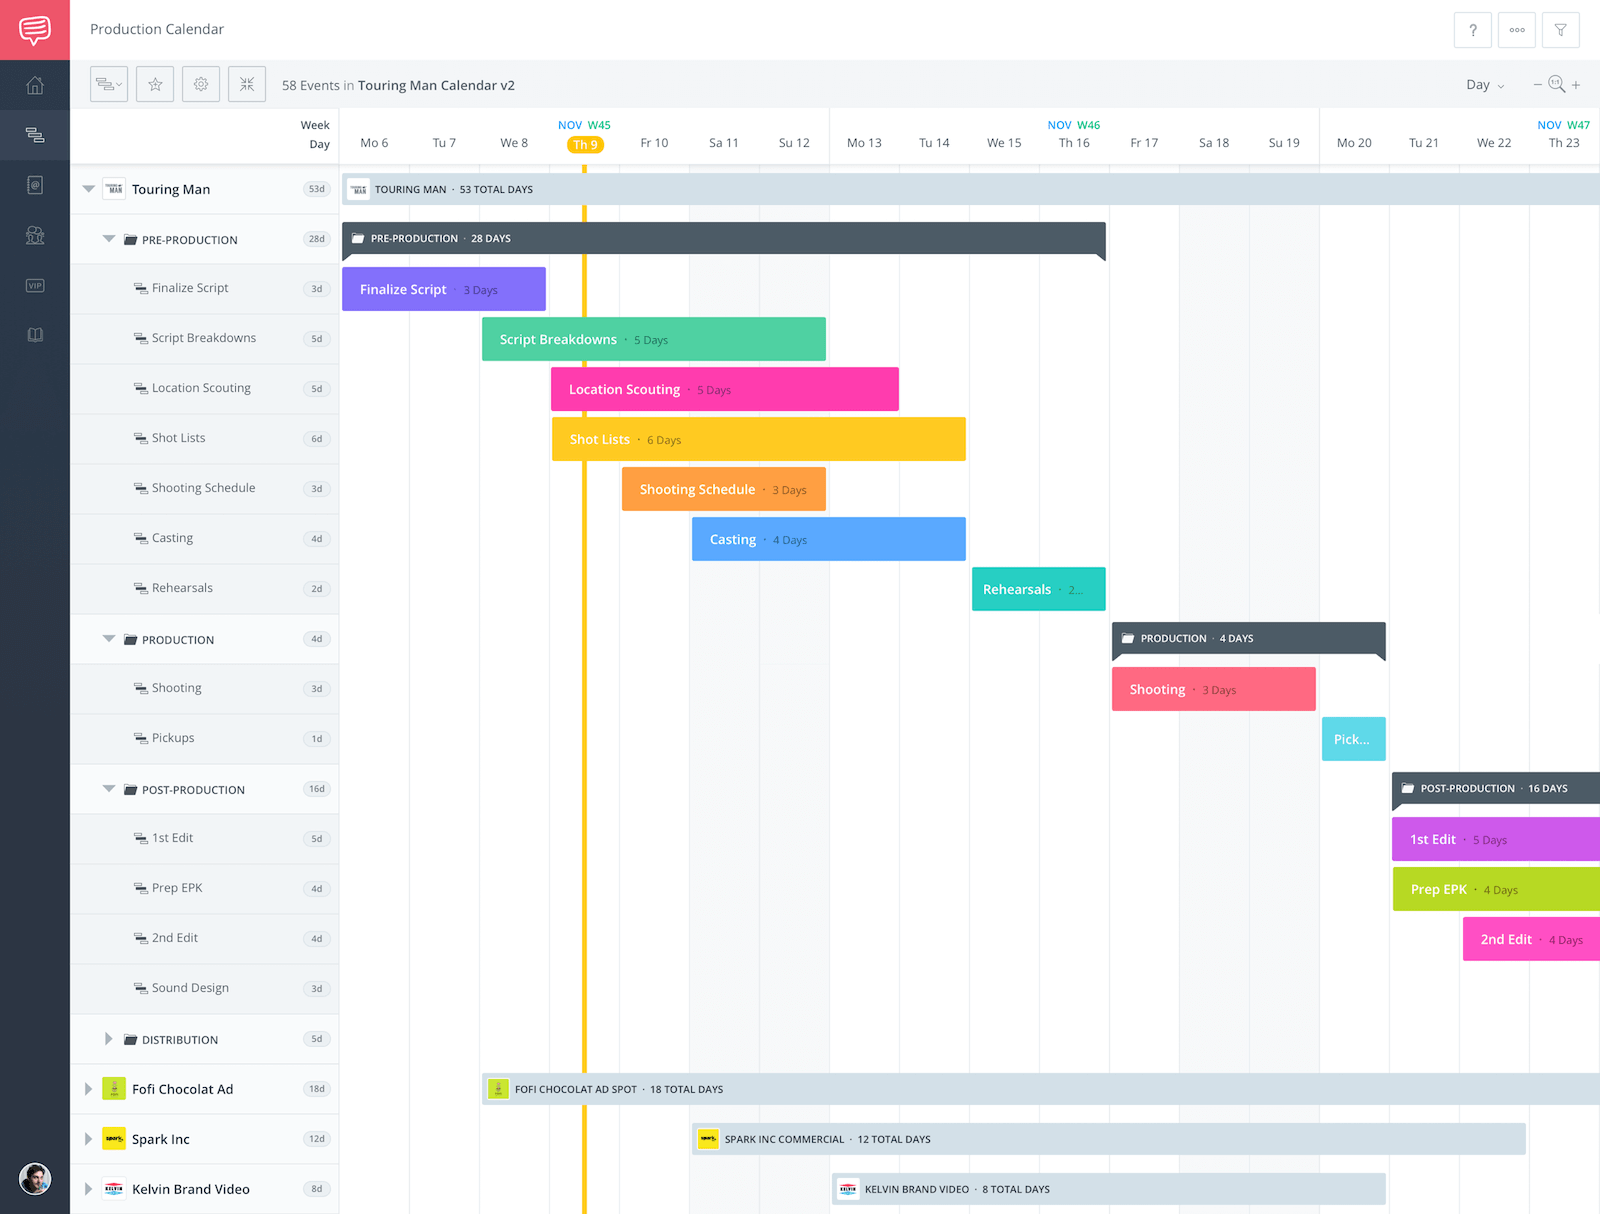 Film, TV and Video Production Calendar - Drag and Drop - StudioBinder Expanded